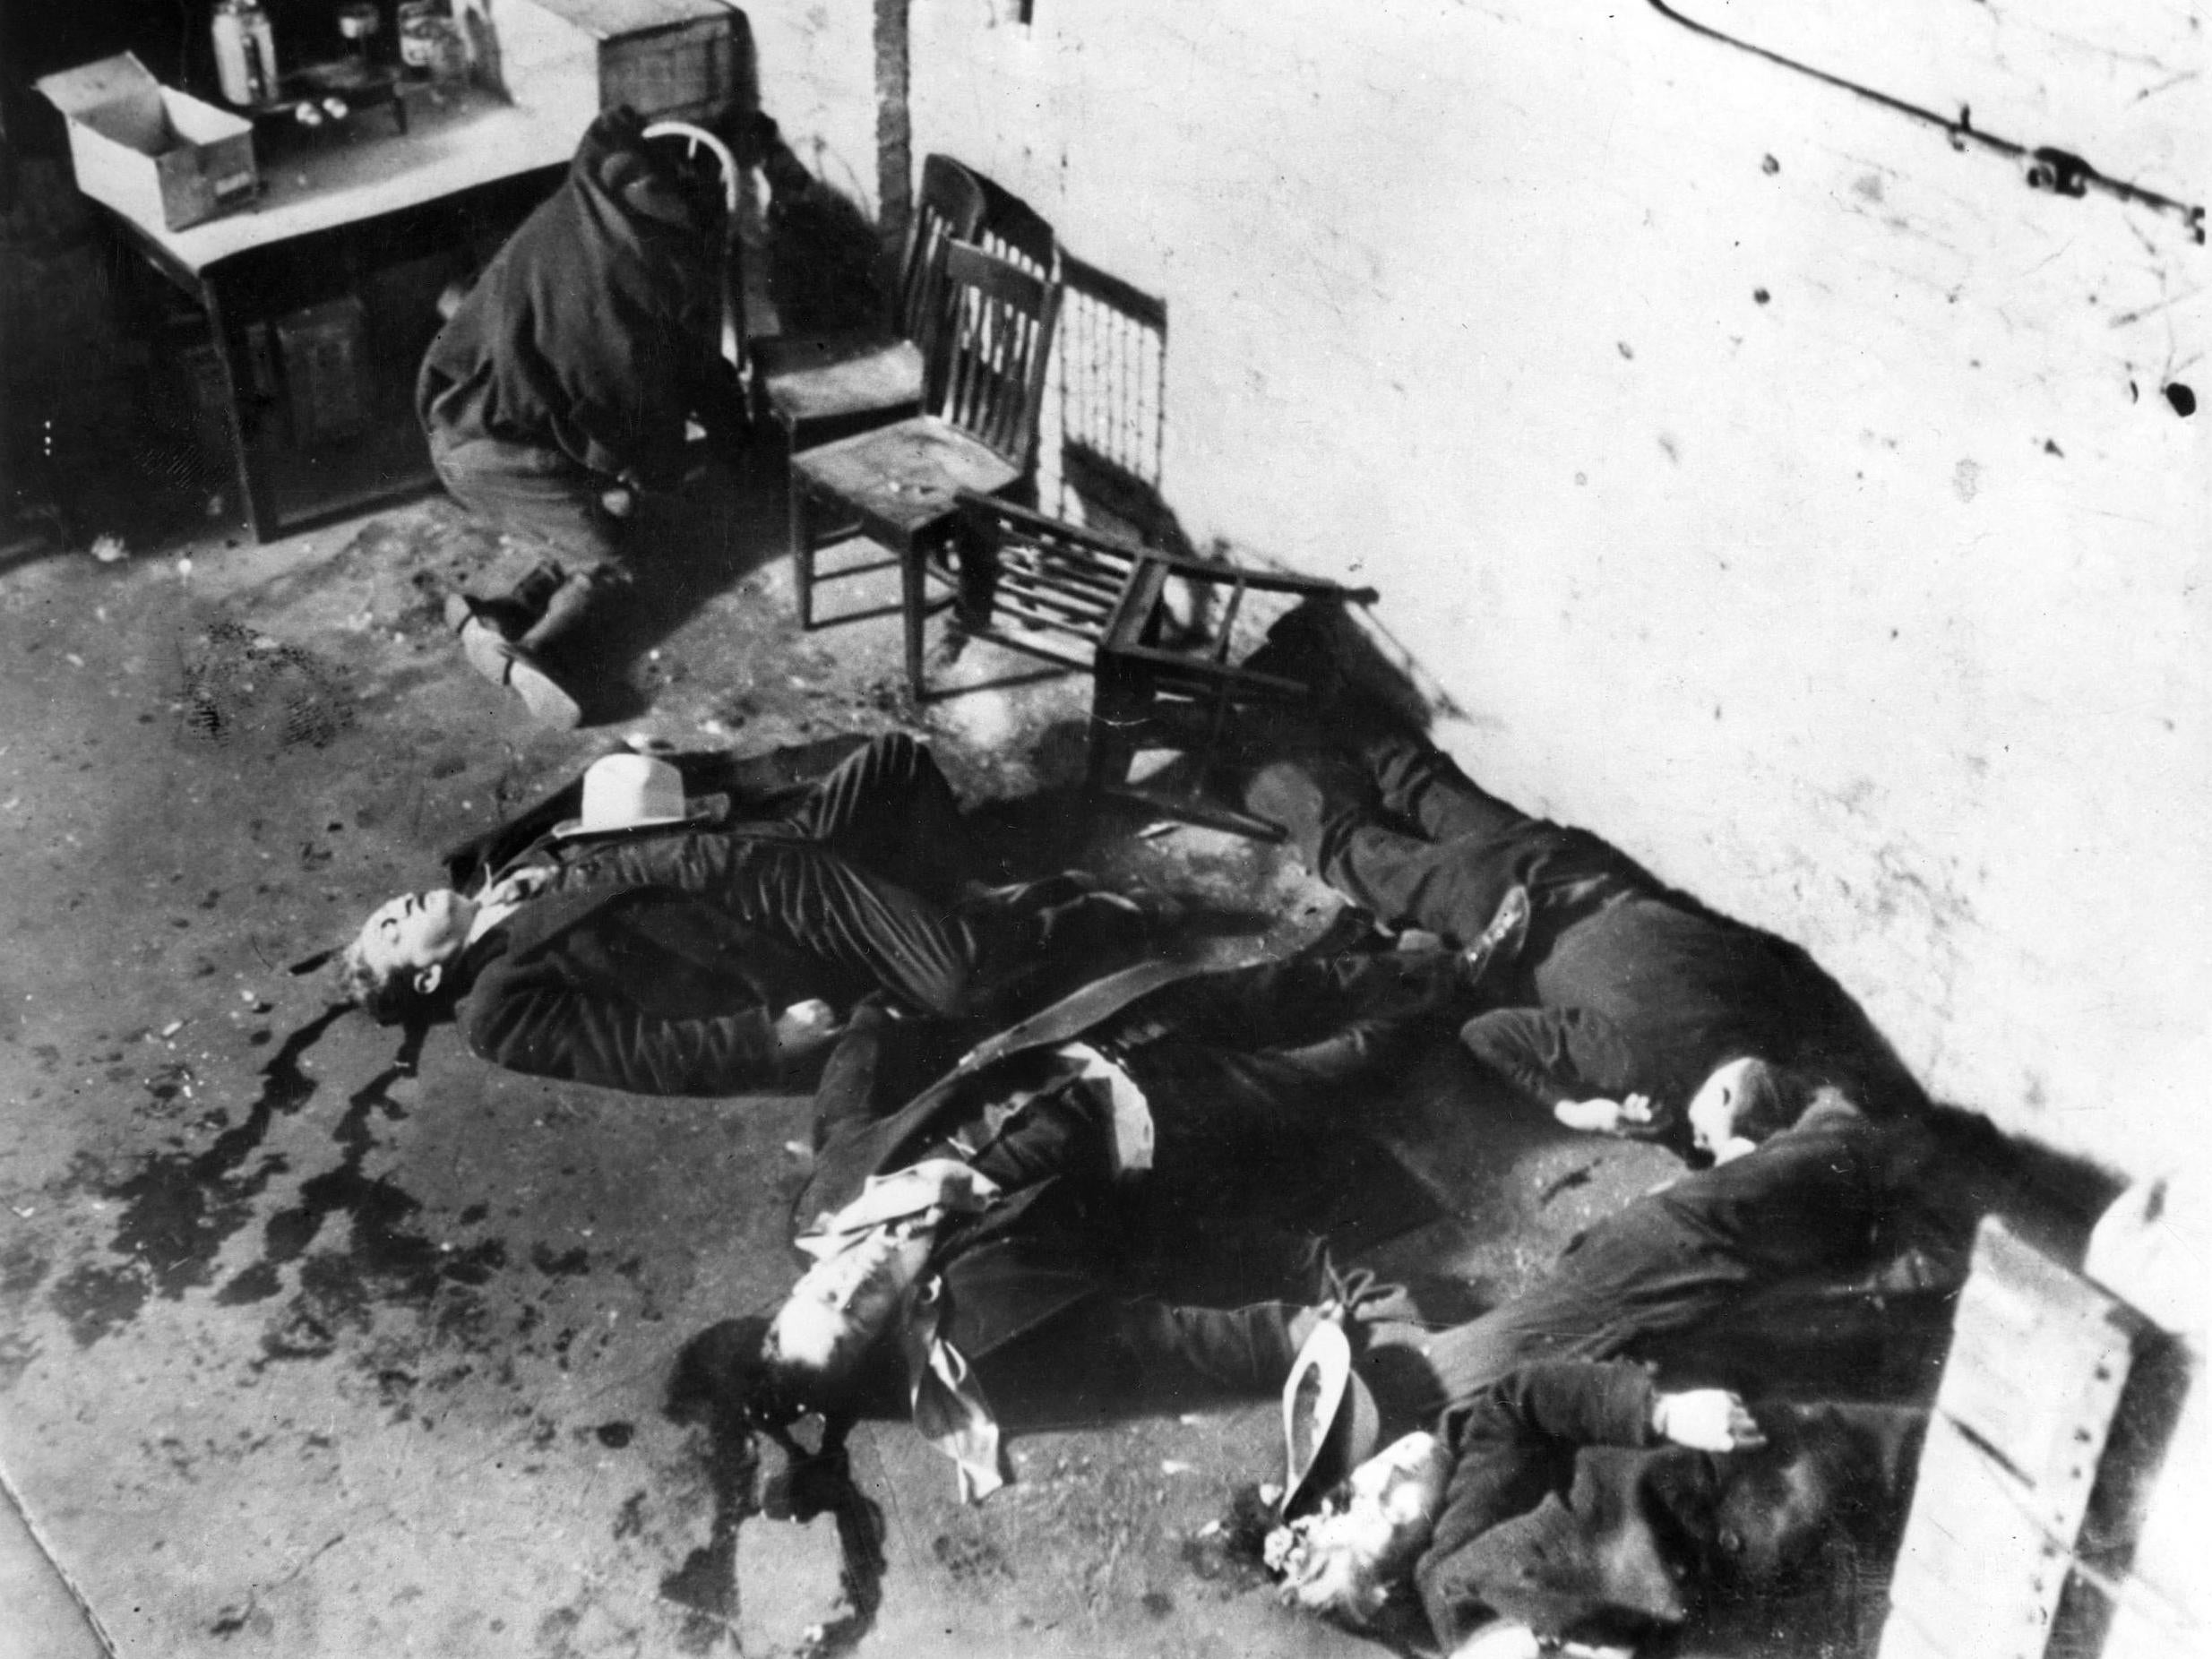 Five of the seven ‘Bugs’ Moran gang members gunned down by Al Capone’s Chicago Outfit on 14 February 1929